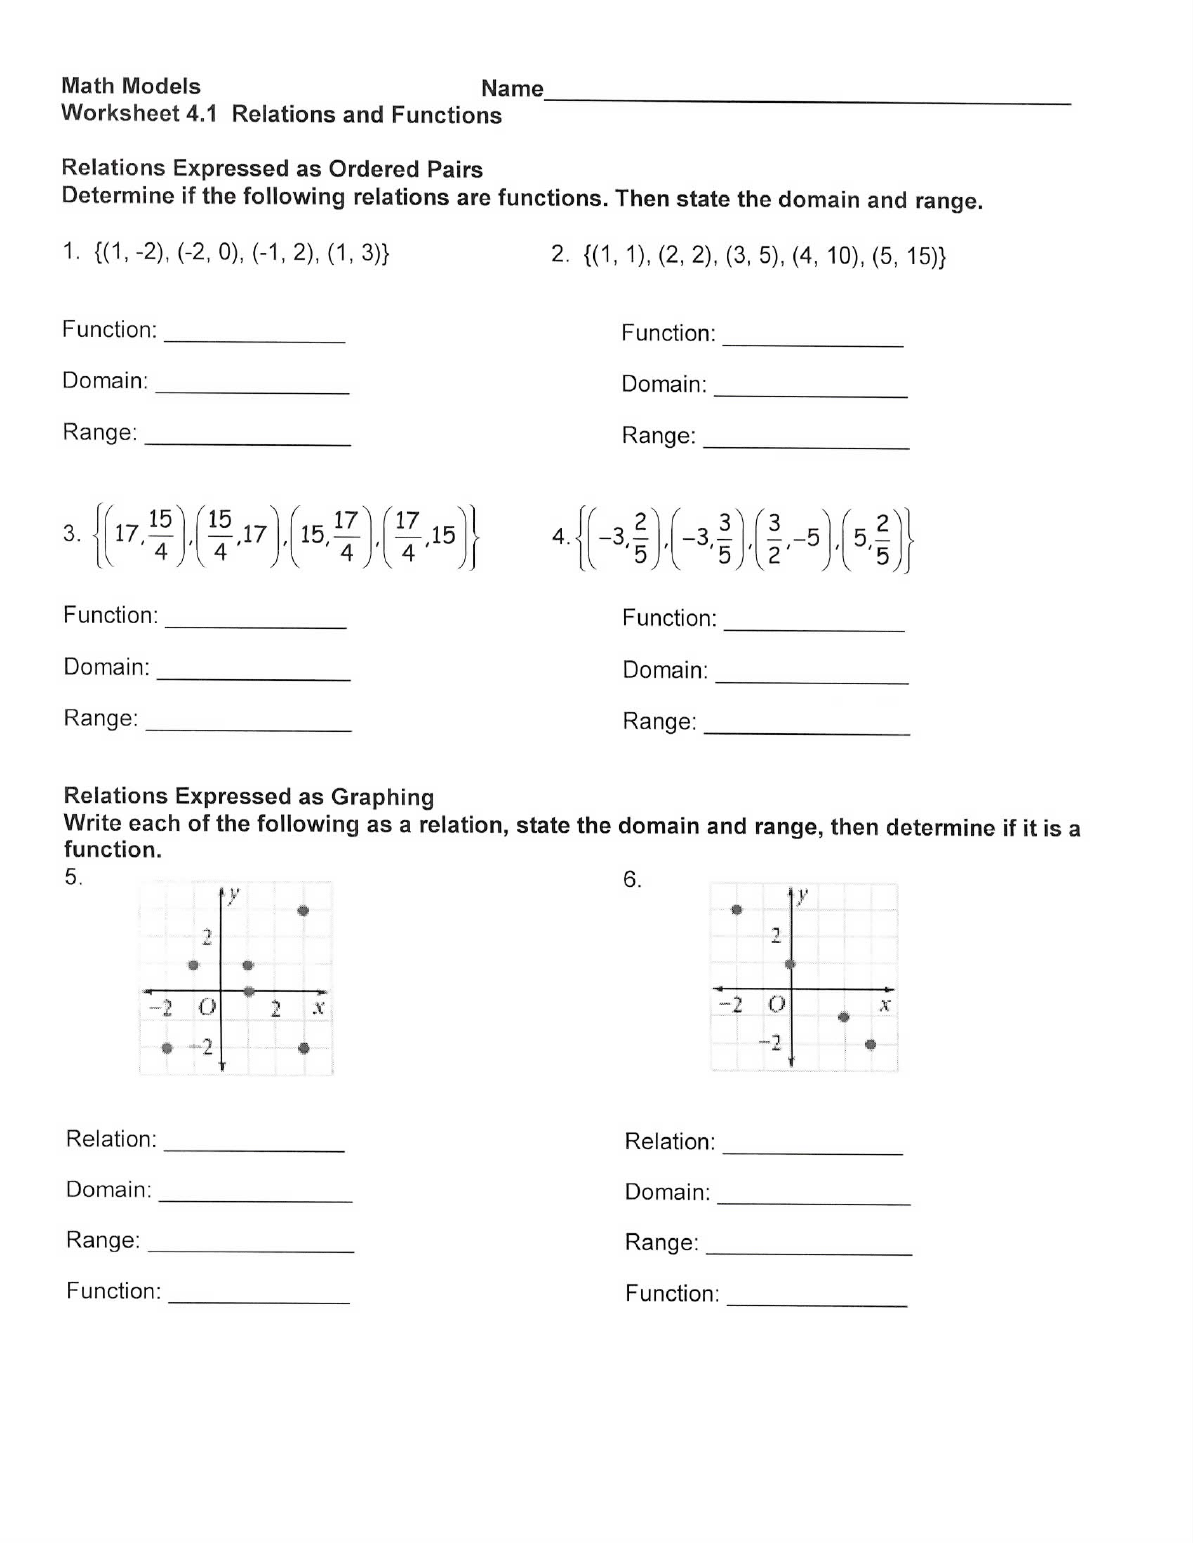 Math Models Worksheet 4 1 Relations And Functions